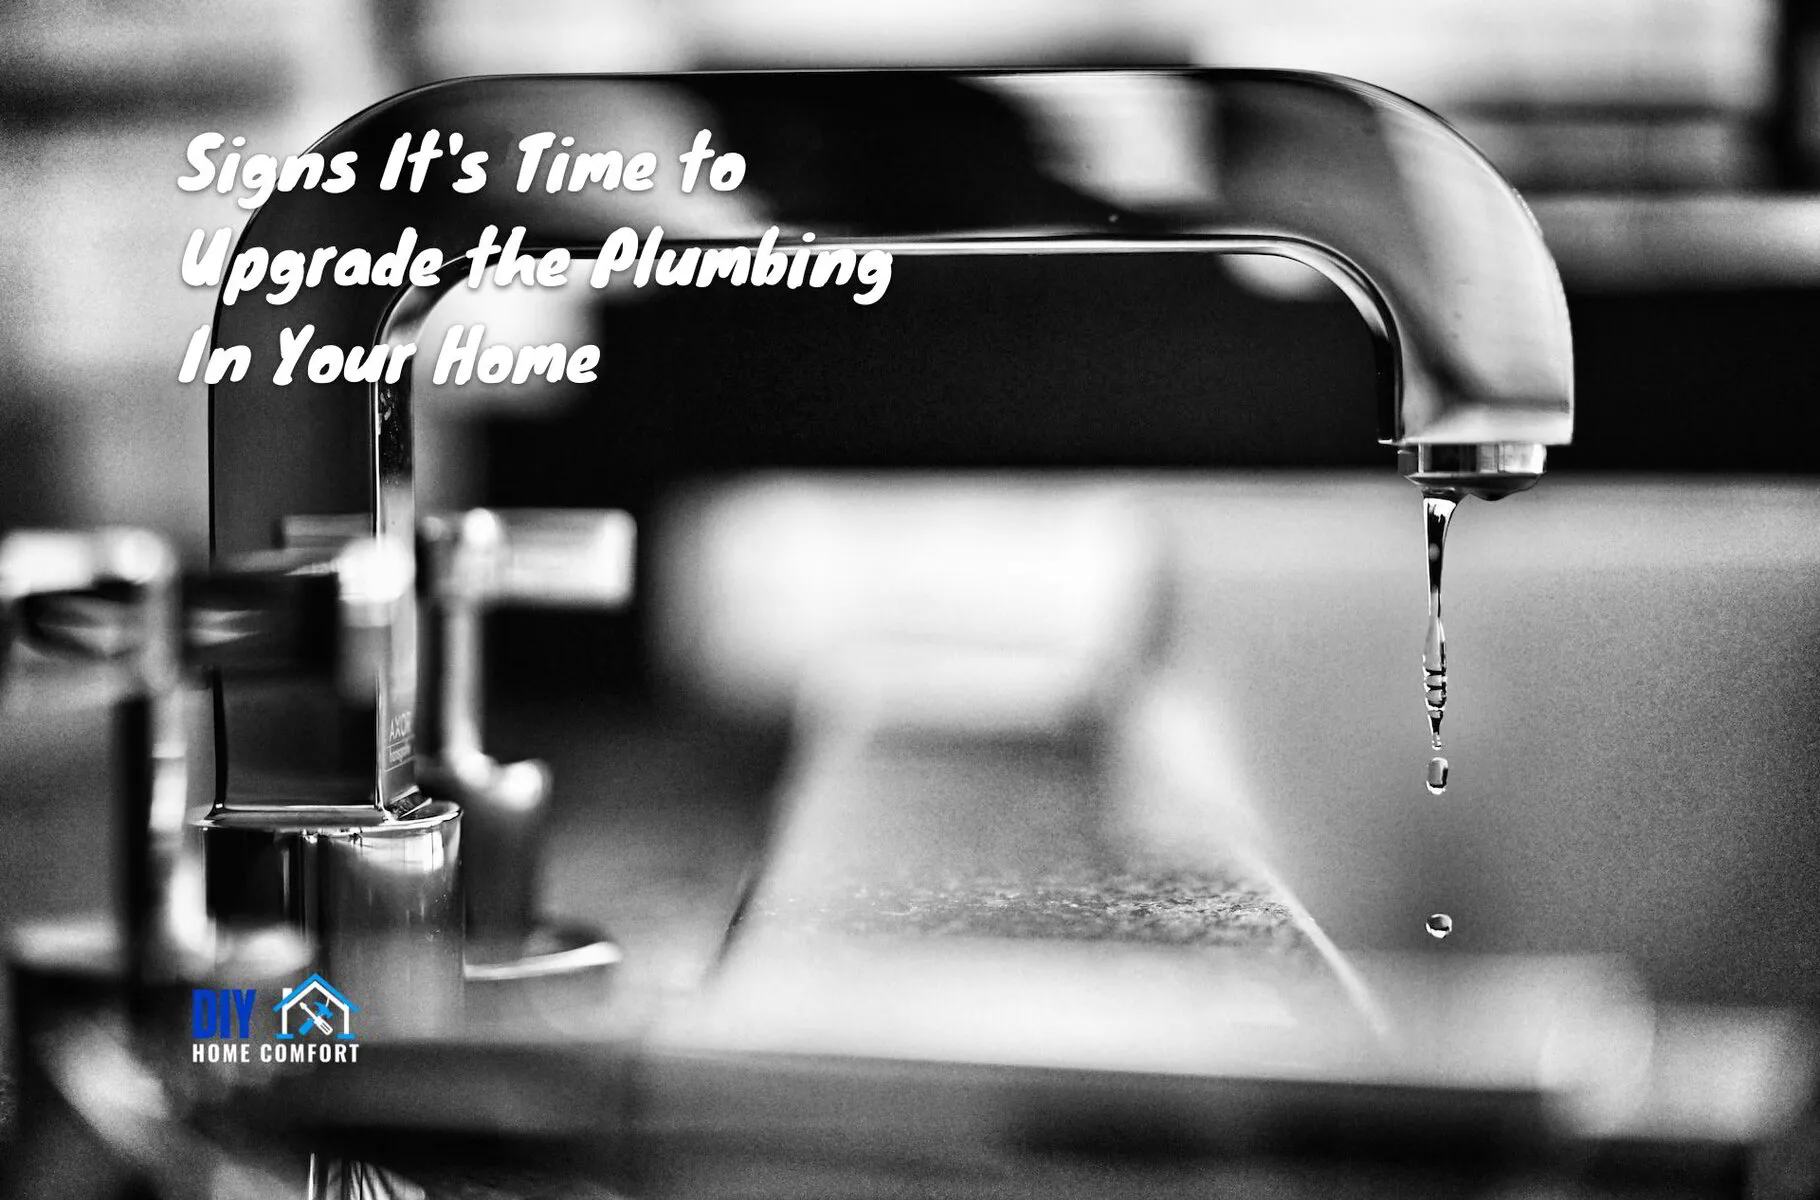 5 Signs It's Time to Upgrade Plumbing In Your Home | DIY Home Comfort